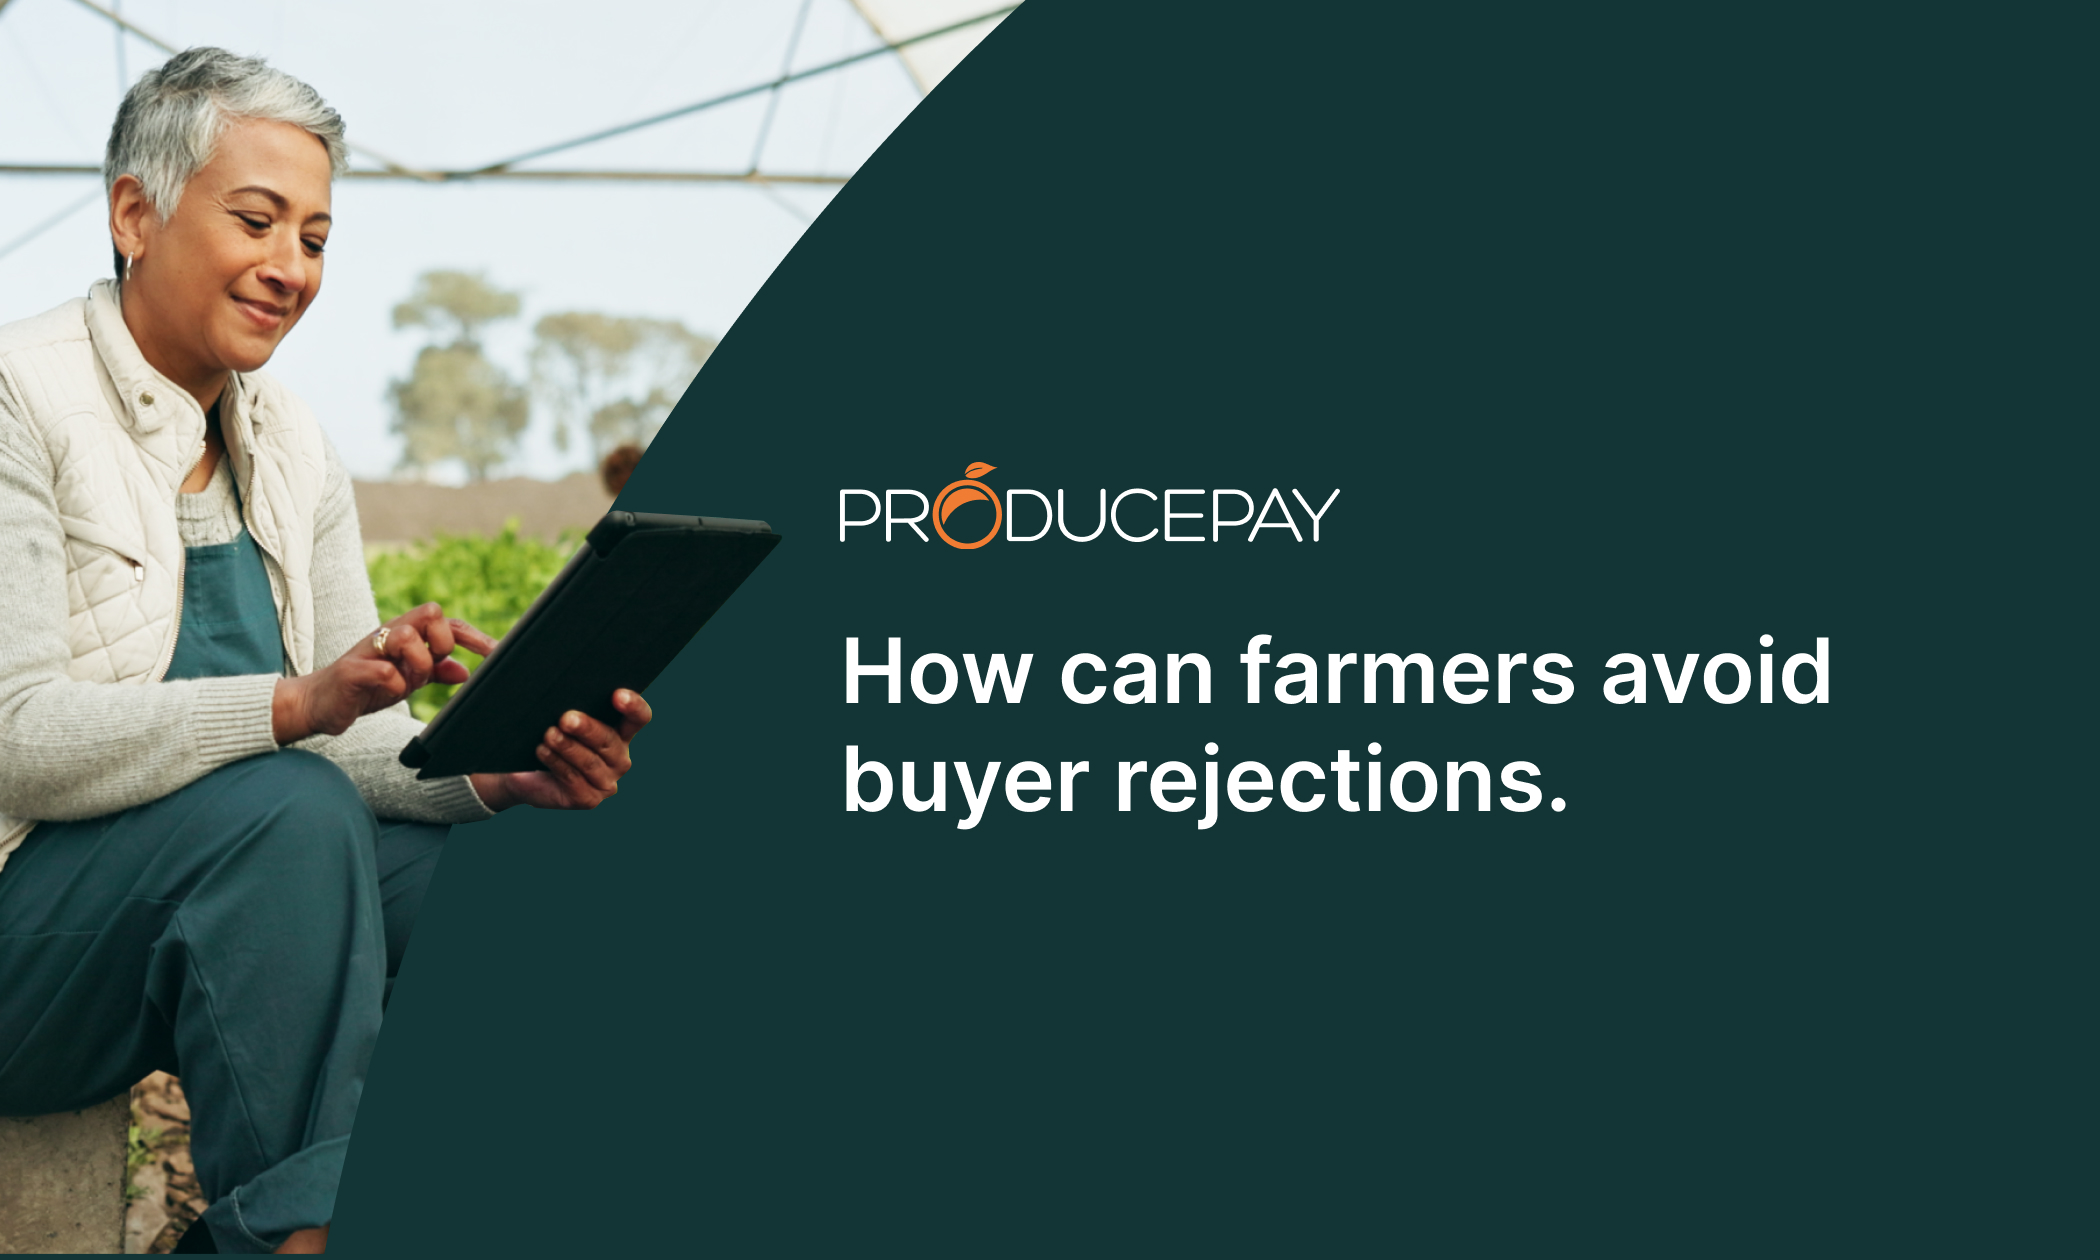 How can farmers avoid buyer rejections